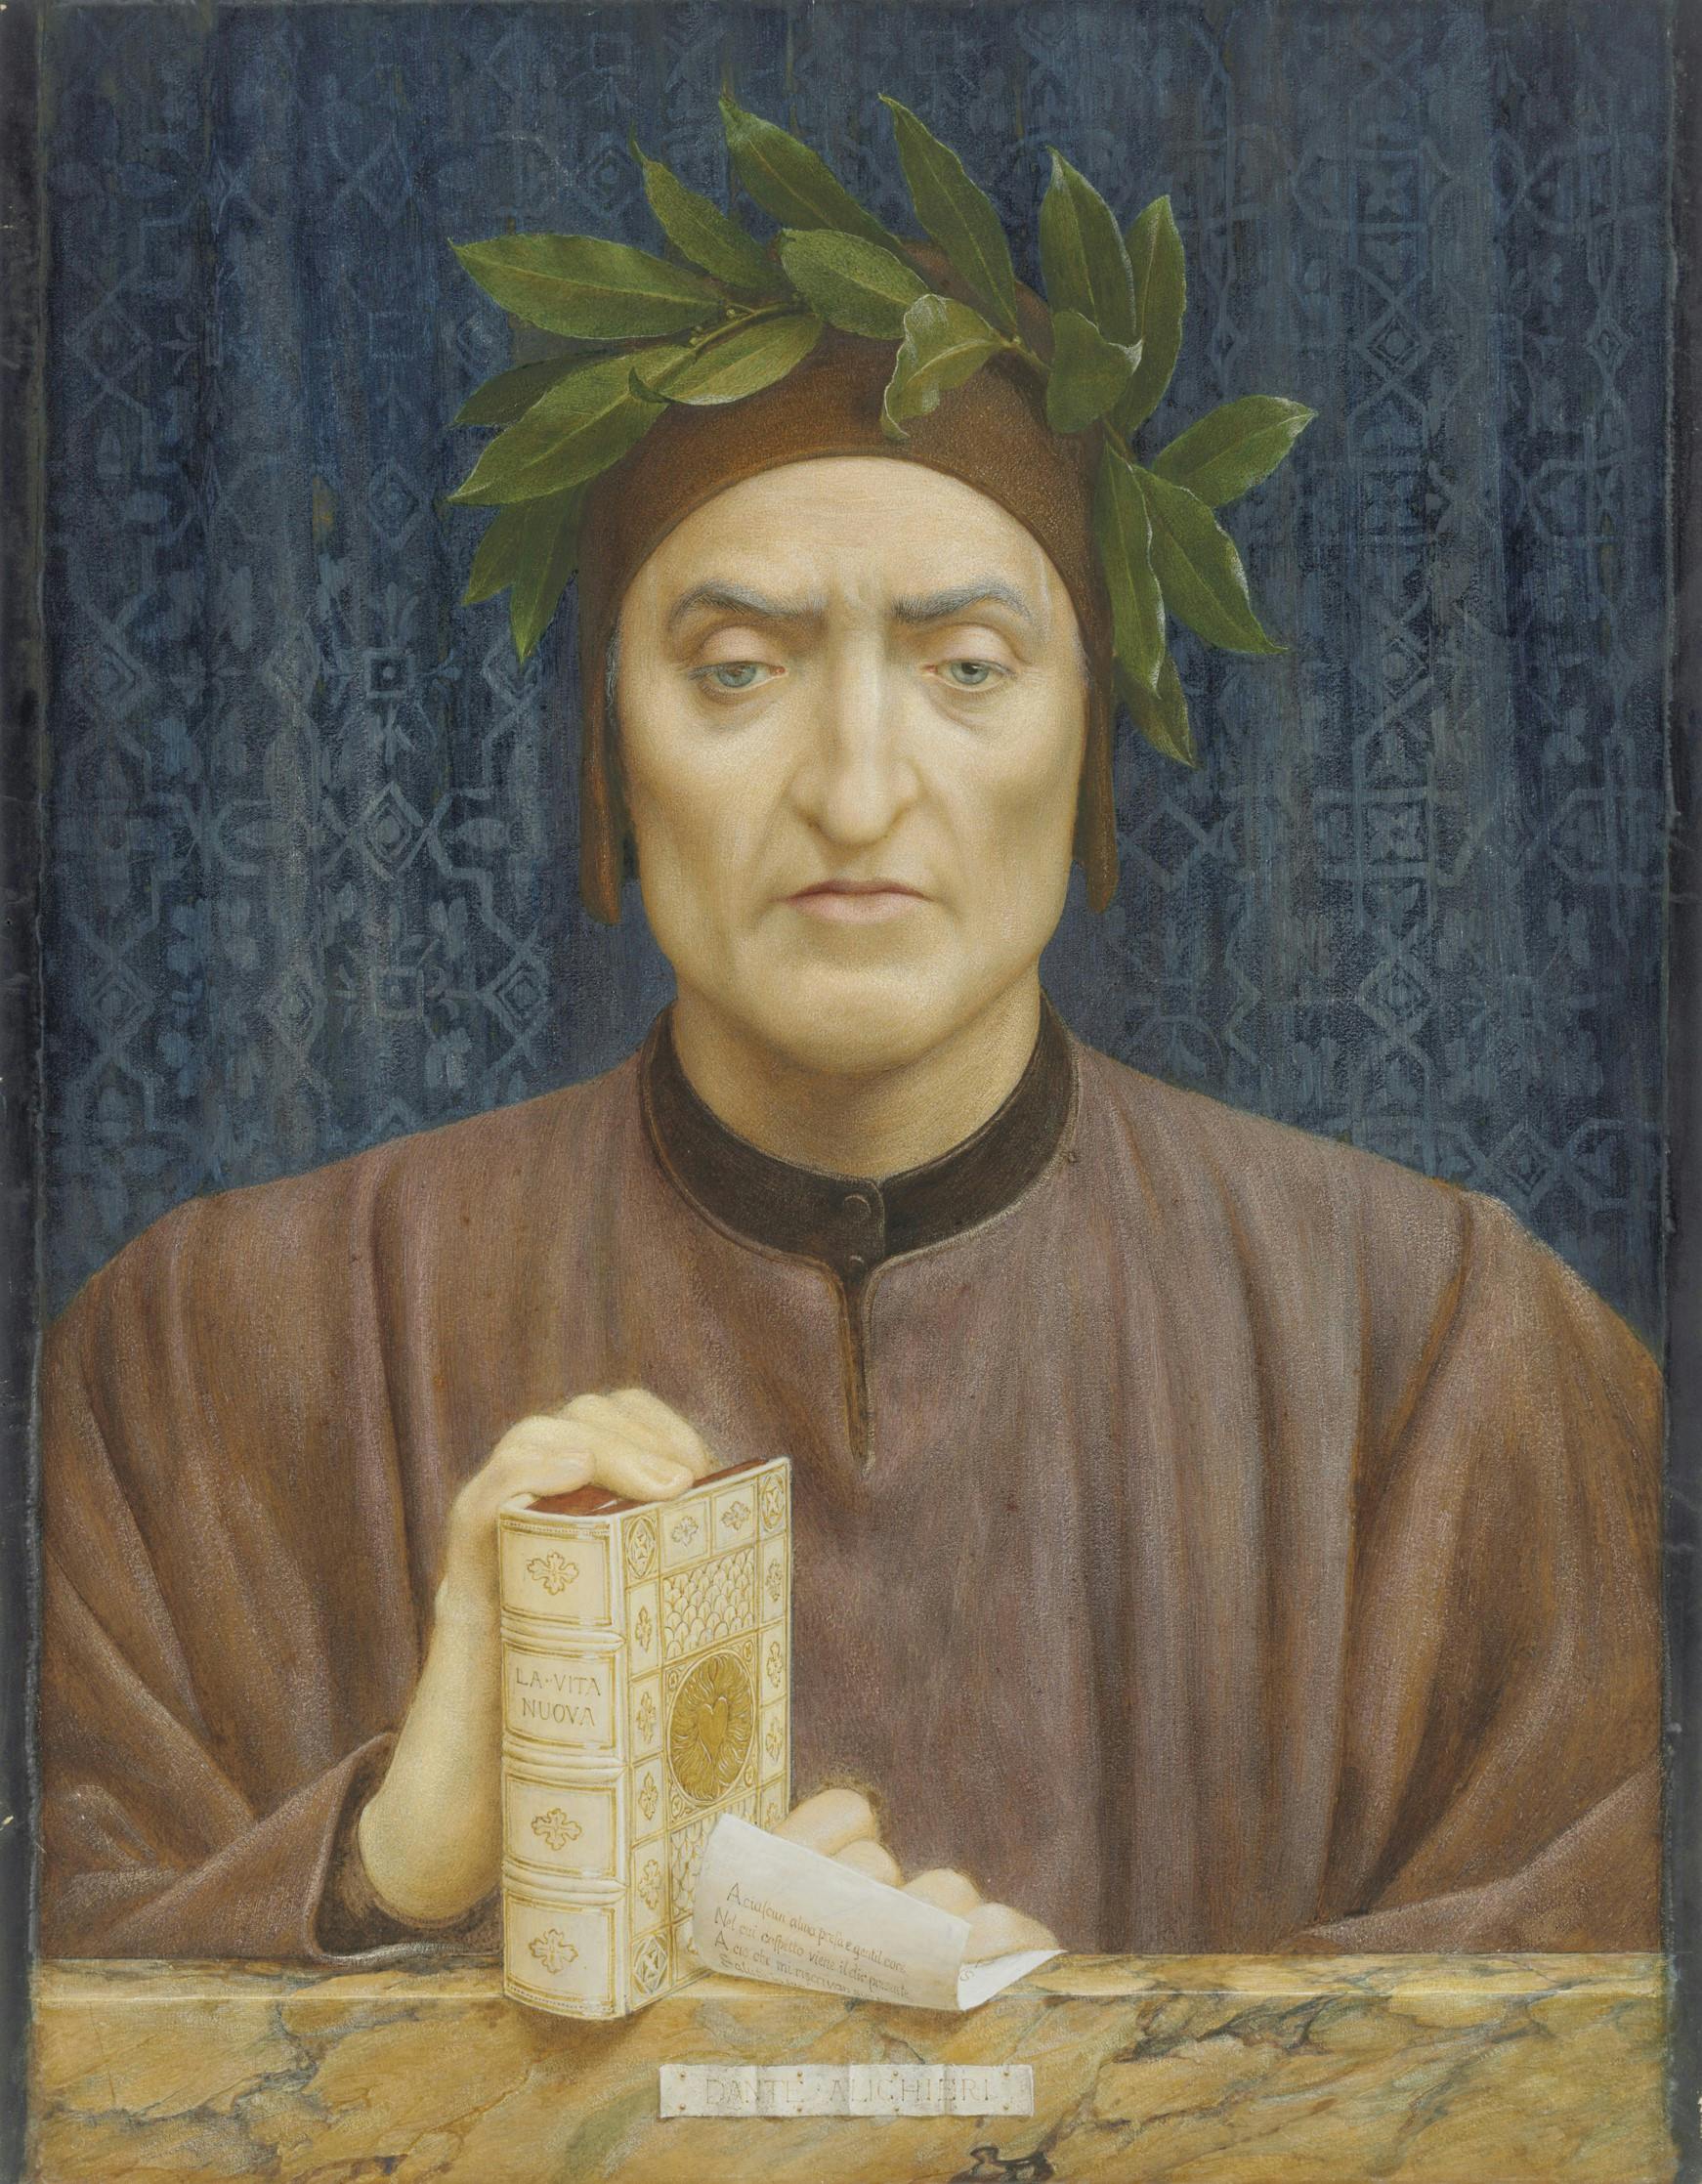 Forlì and the Uffizi join forces for the major exhibition dedicated to Dante